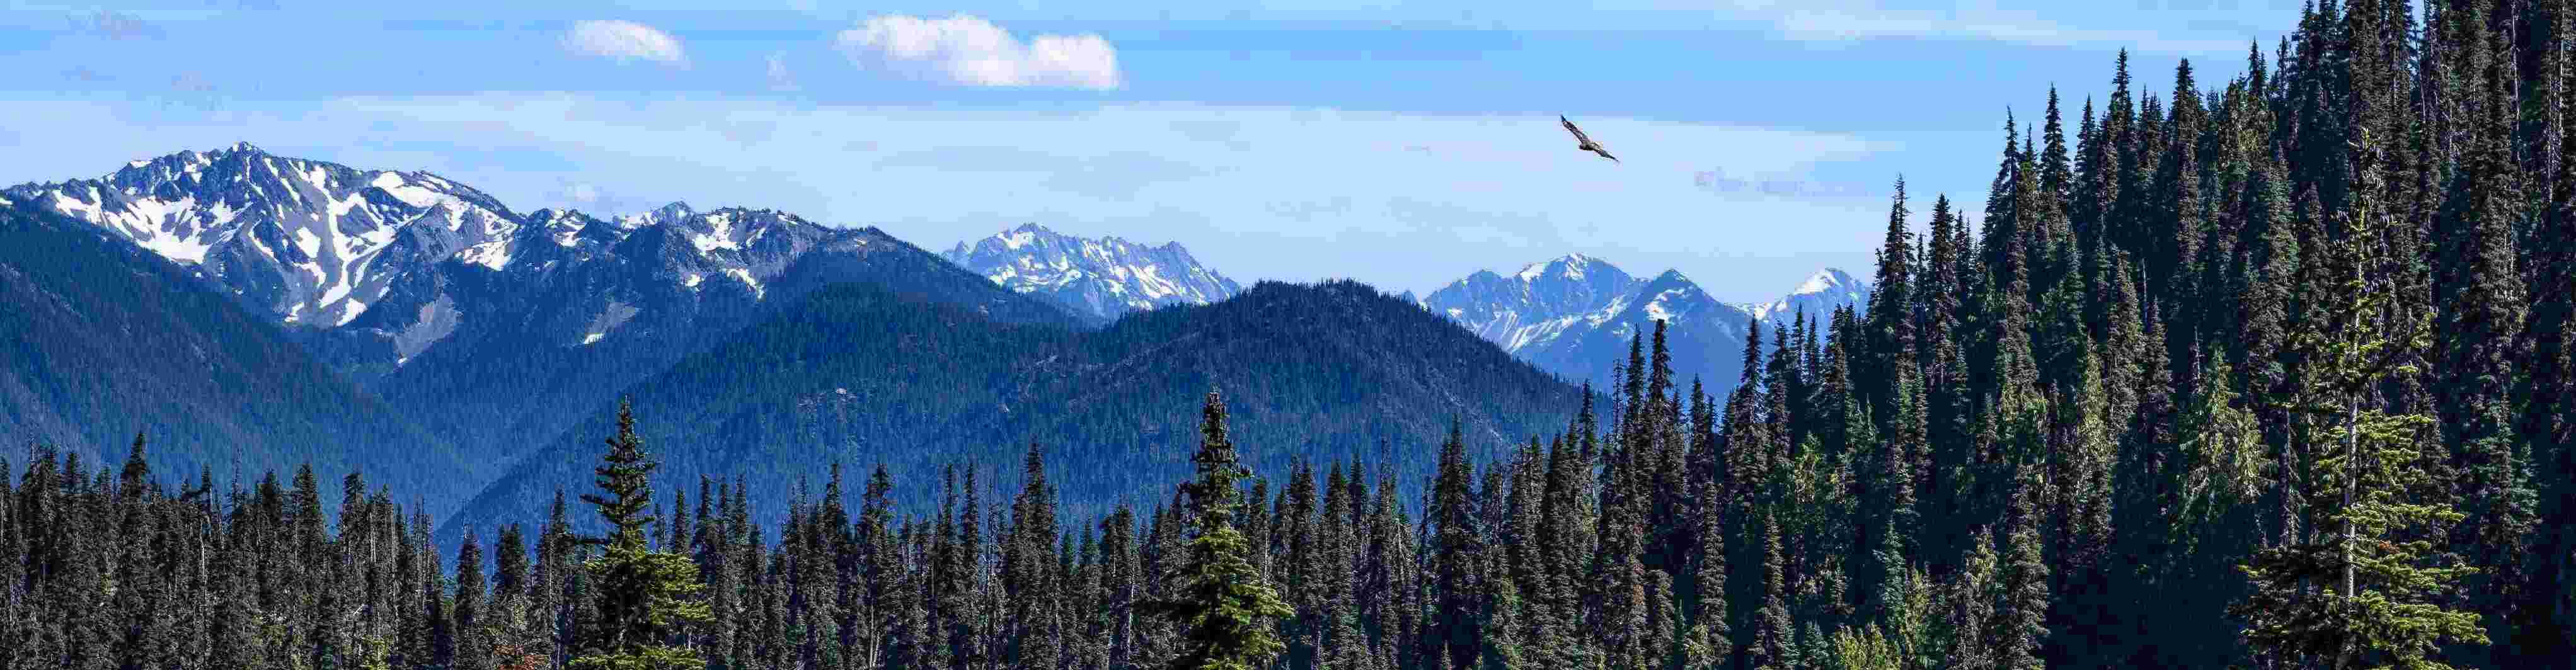 A bird soaring over the pine trees of Olympic National Park with snow-capped peaks in the background